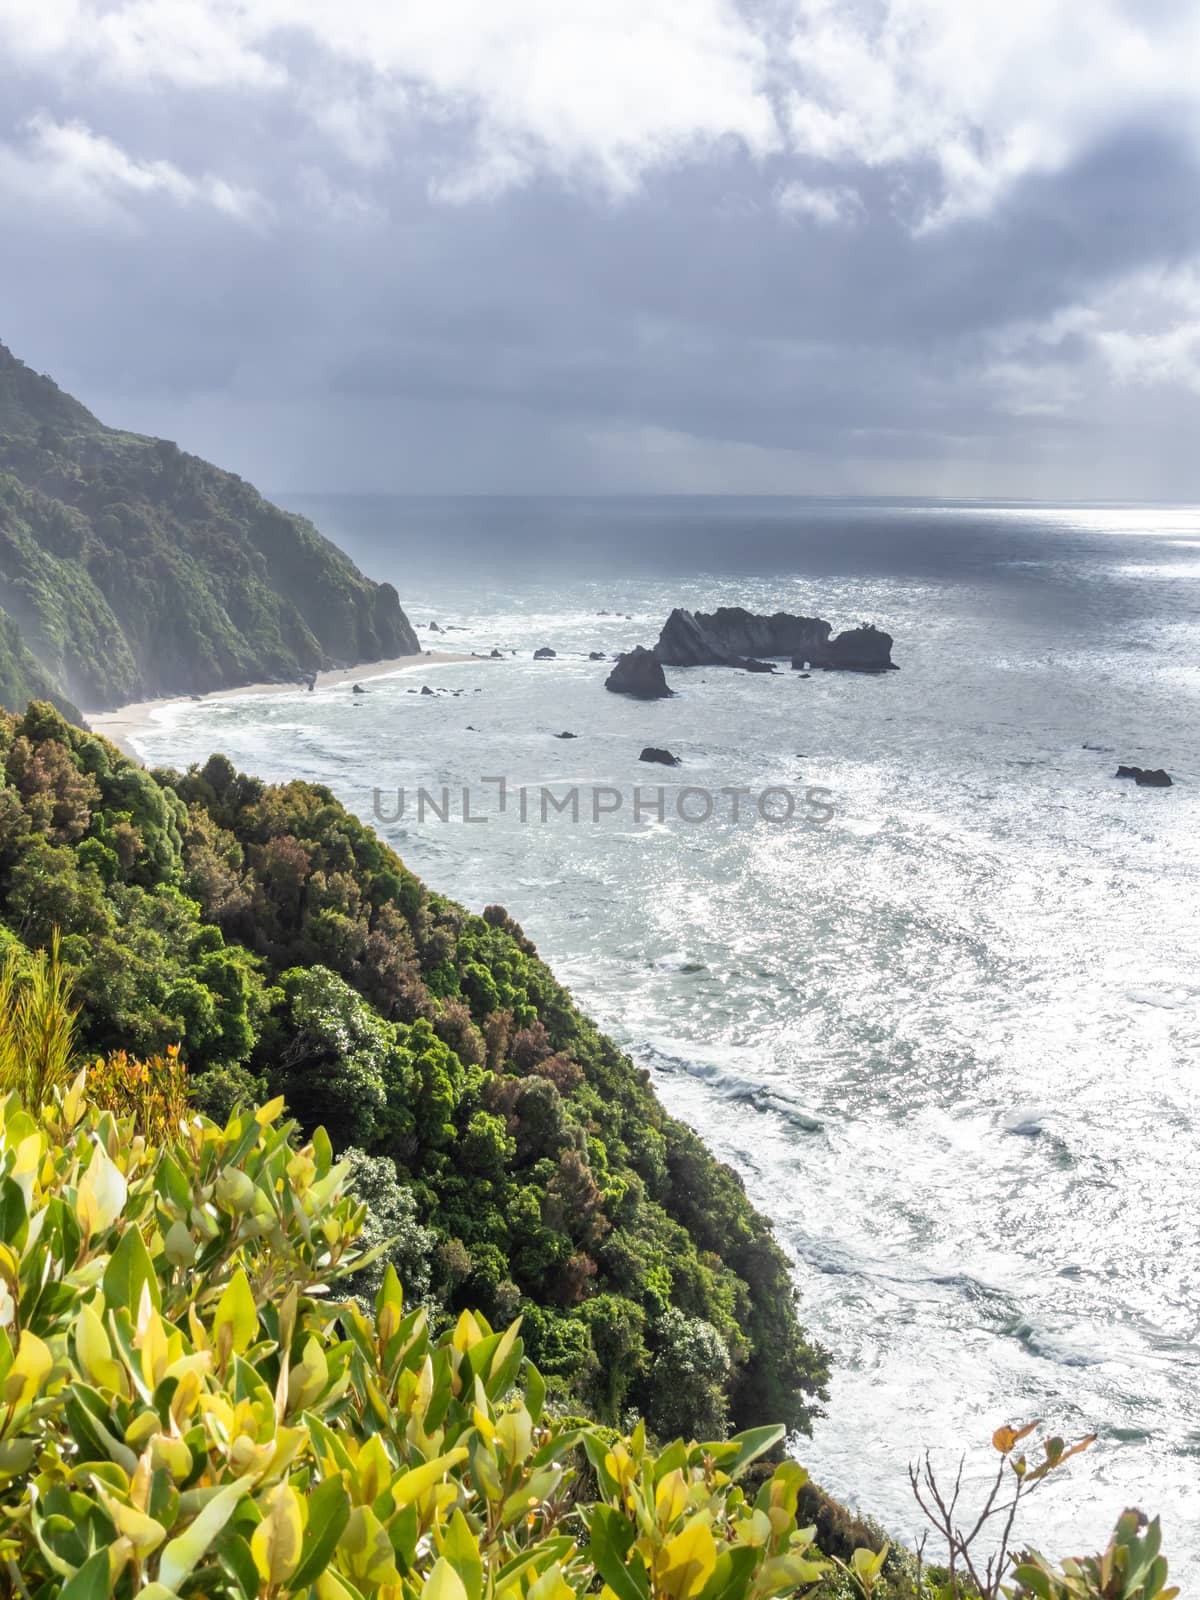 An image of a rough coast at south island New Zealand